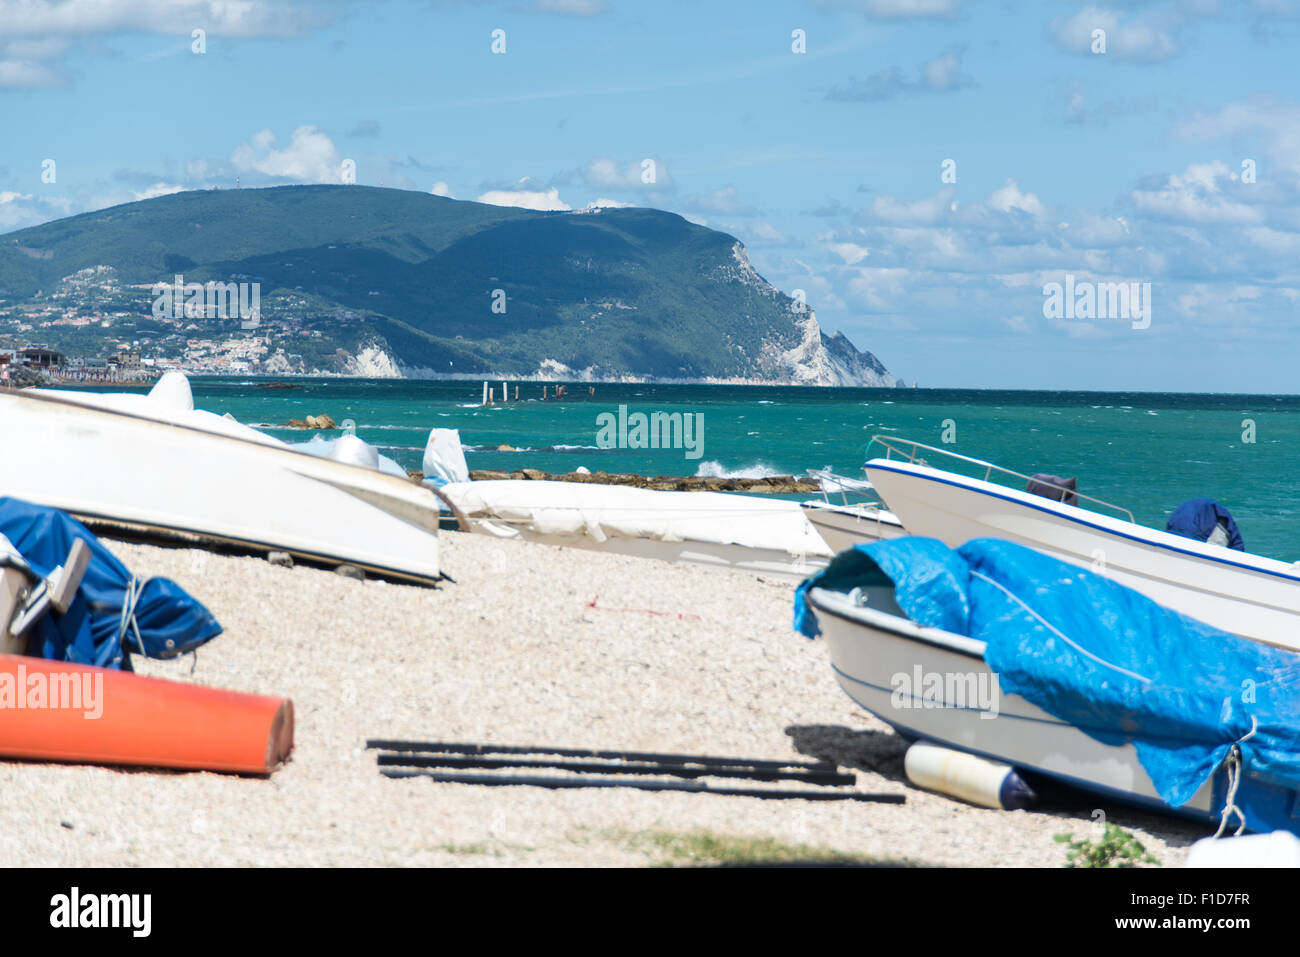 View of the Mount Conero, Ancona, from a beach in Numana, Italy, with boats Stock Photo